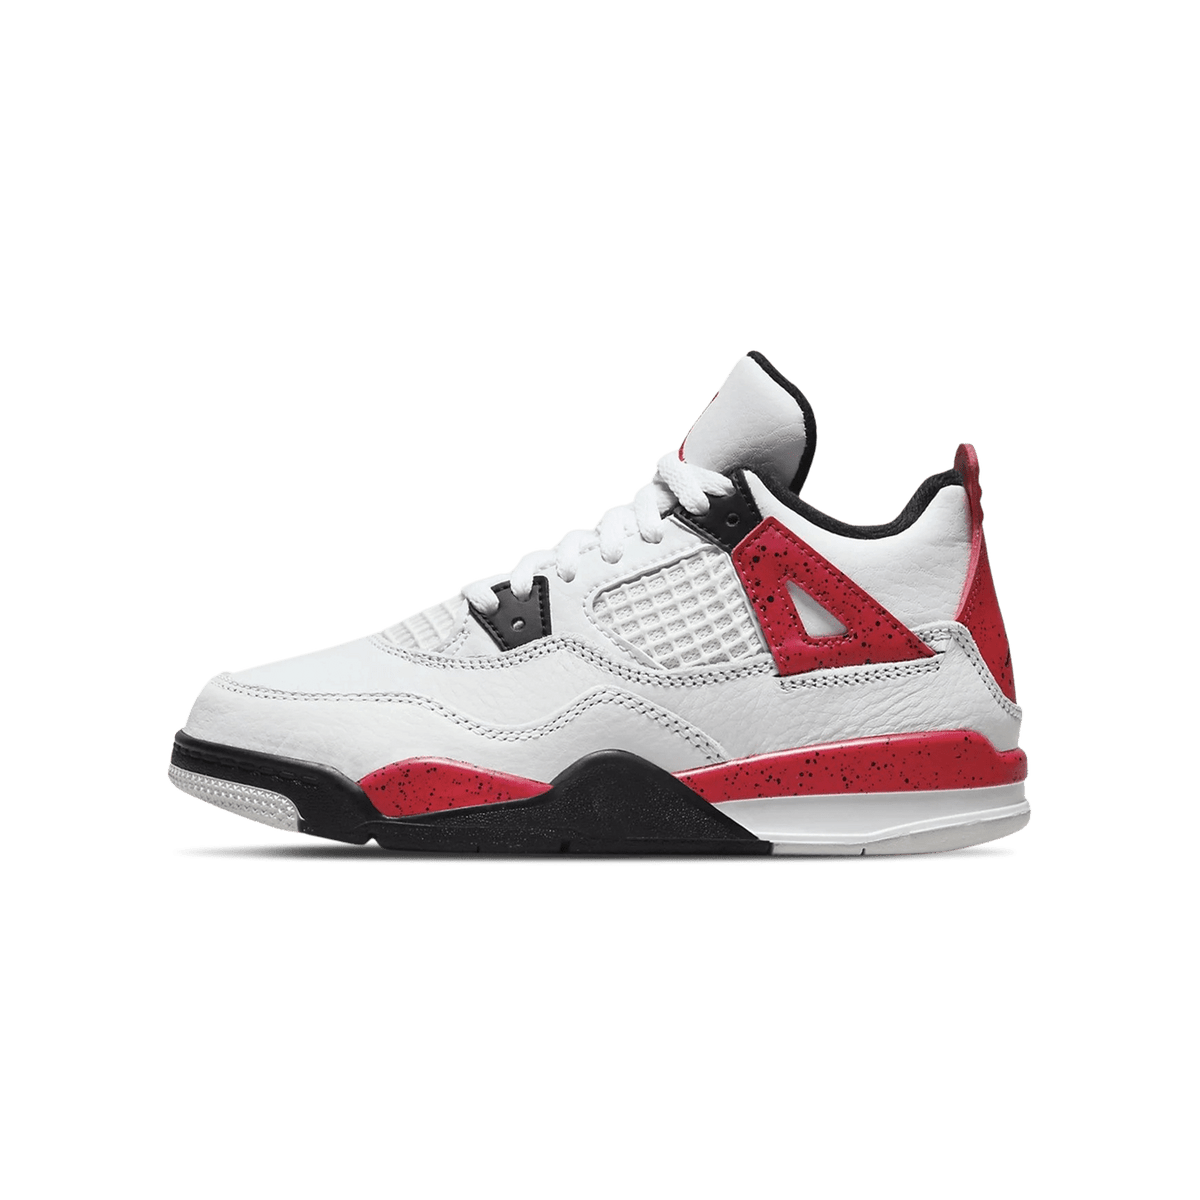 Another One For The Lux Collection! - The LV x Air Jordan 4 Gym Red -  Sneakerz